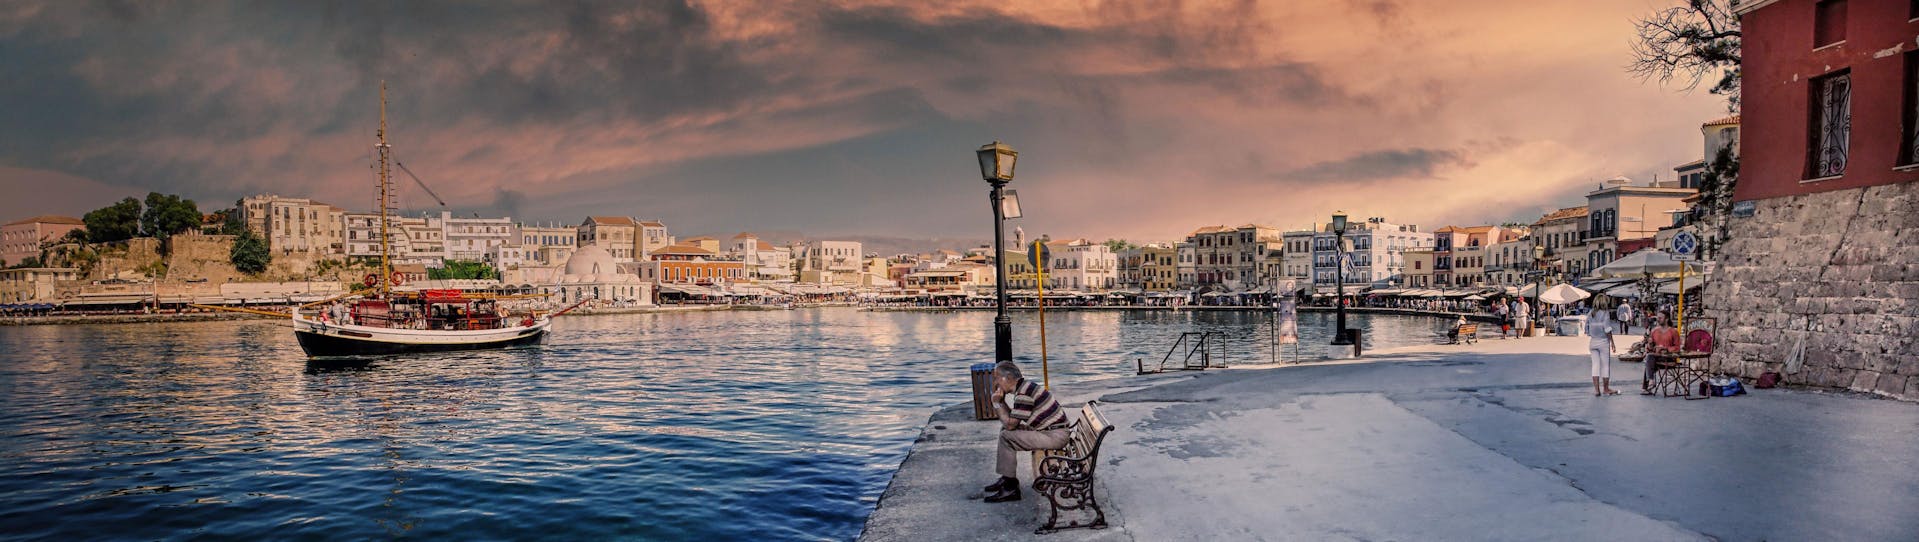 The harbor of Chania, where the boat trips from Mermaid Tours start.